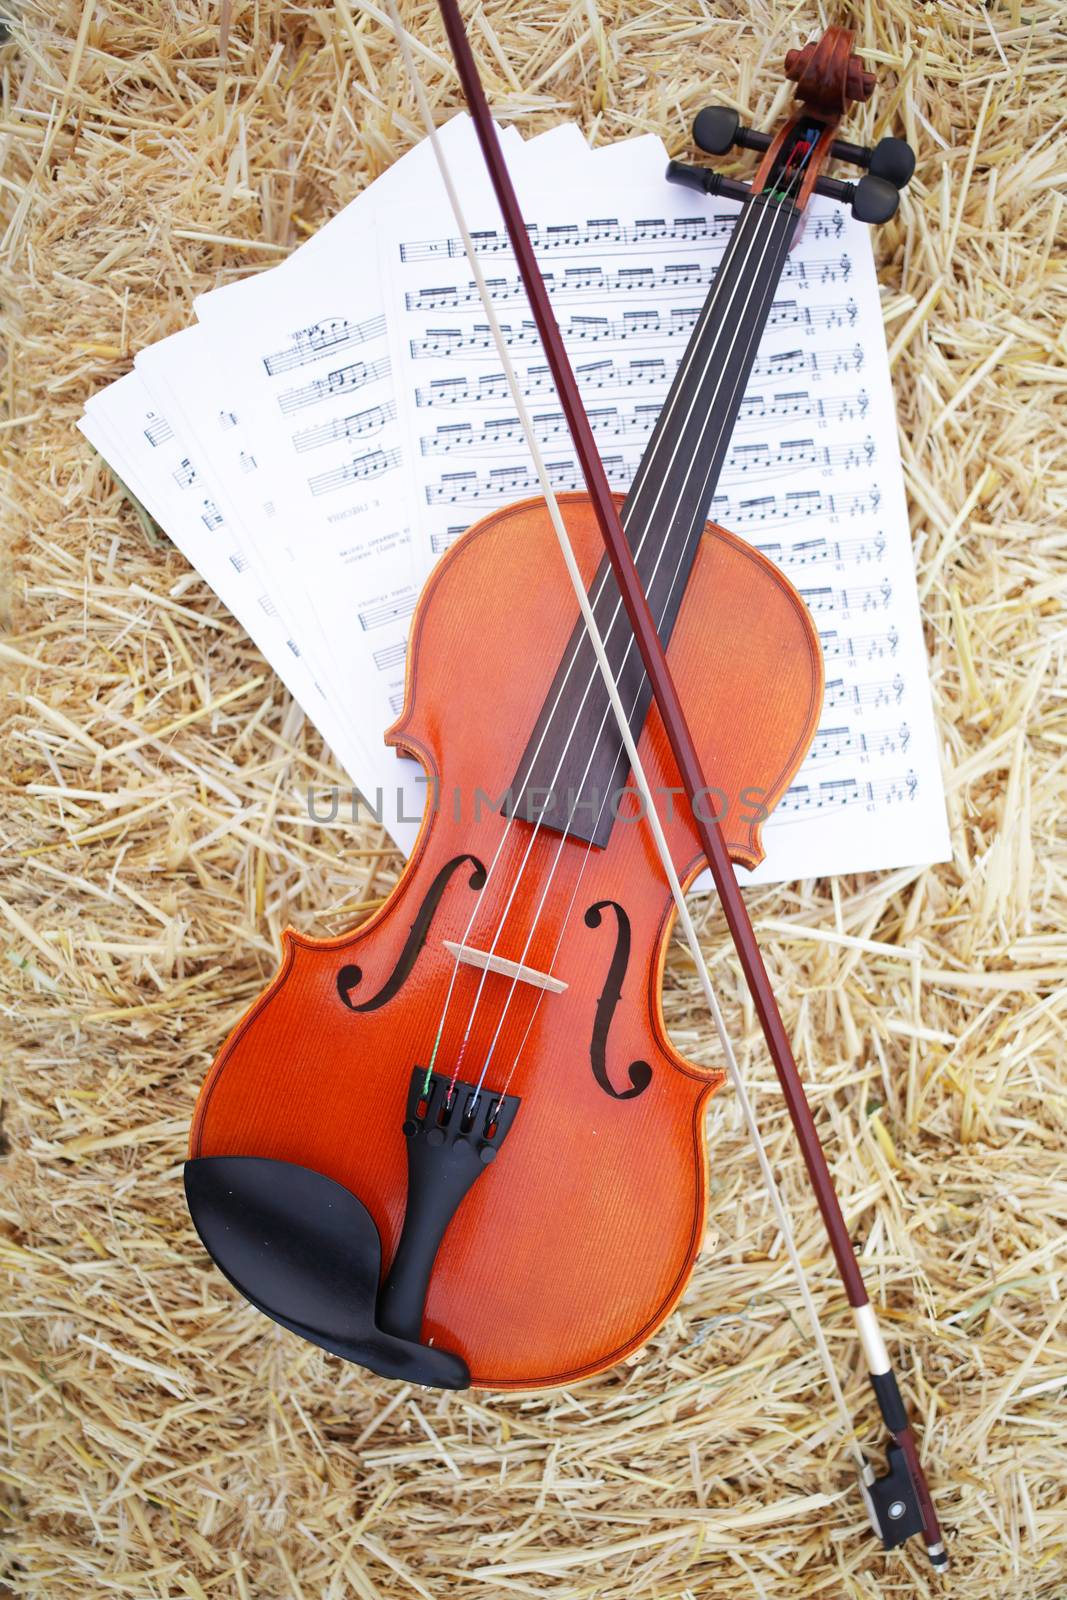 One violin and bow placed on a pile of straw in the field. Music Violin training by selinsmo